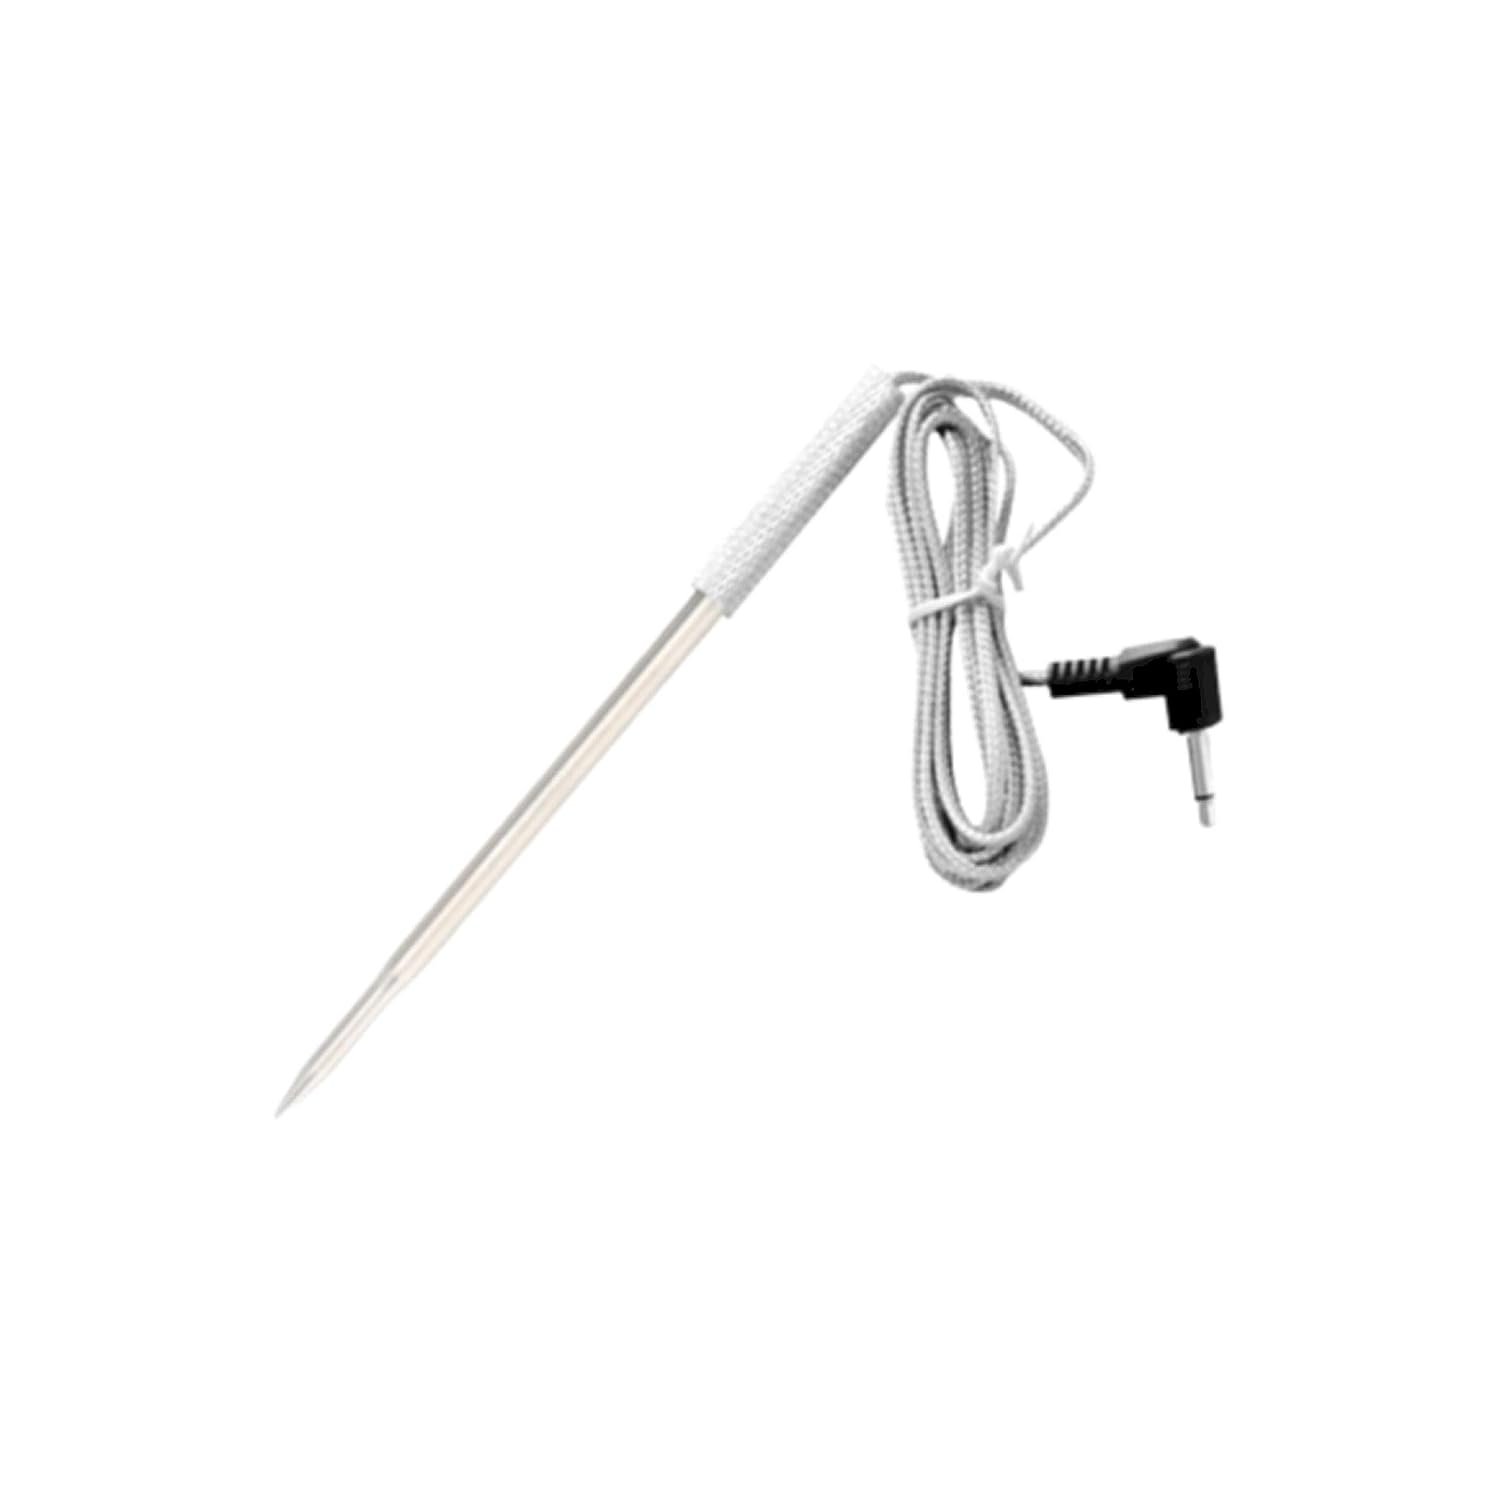 Replacement Probes for Cooking Thermometers (4 Options)